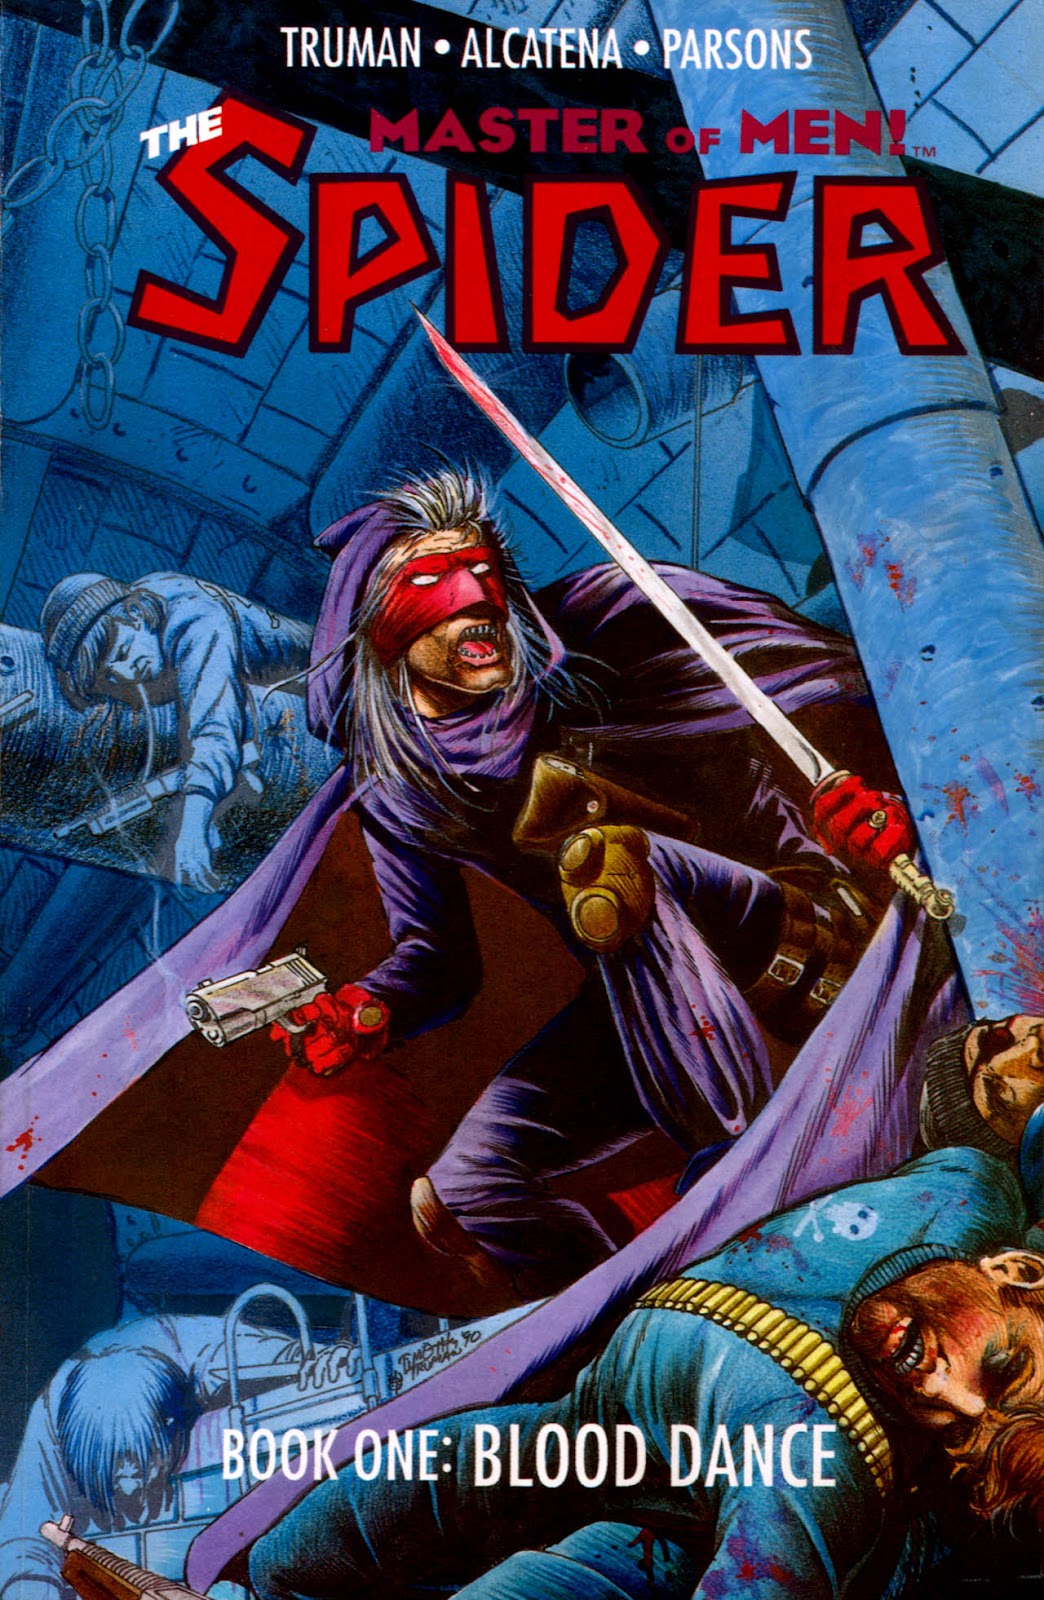 The Spider (1991) 1 Page 1